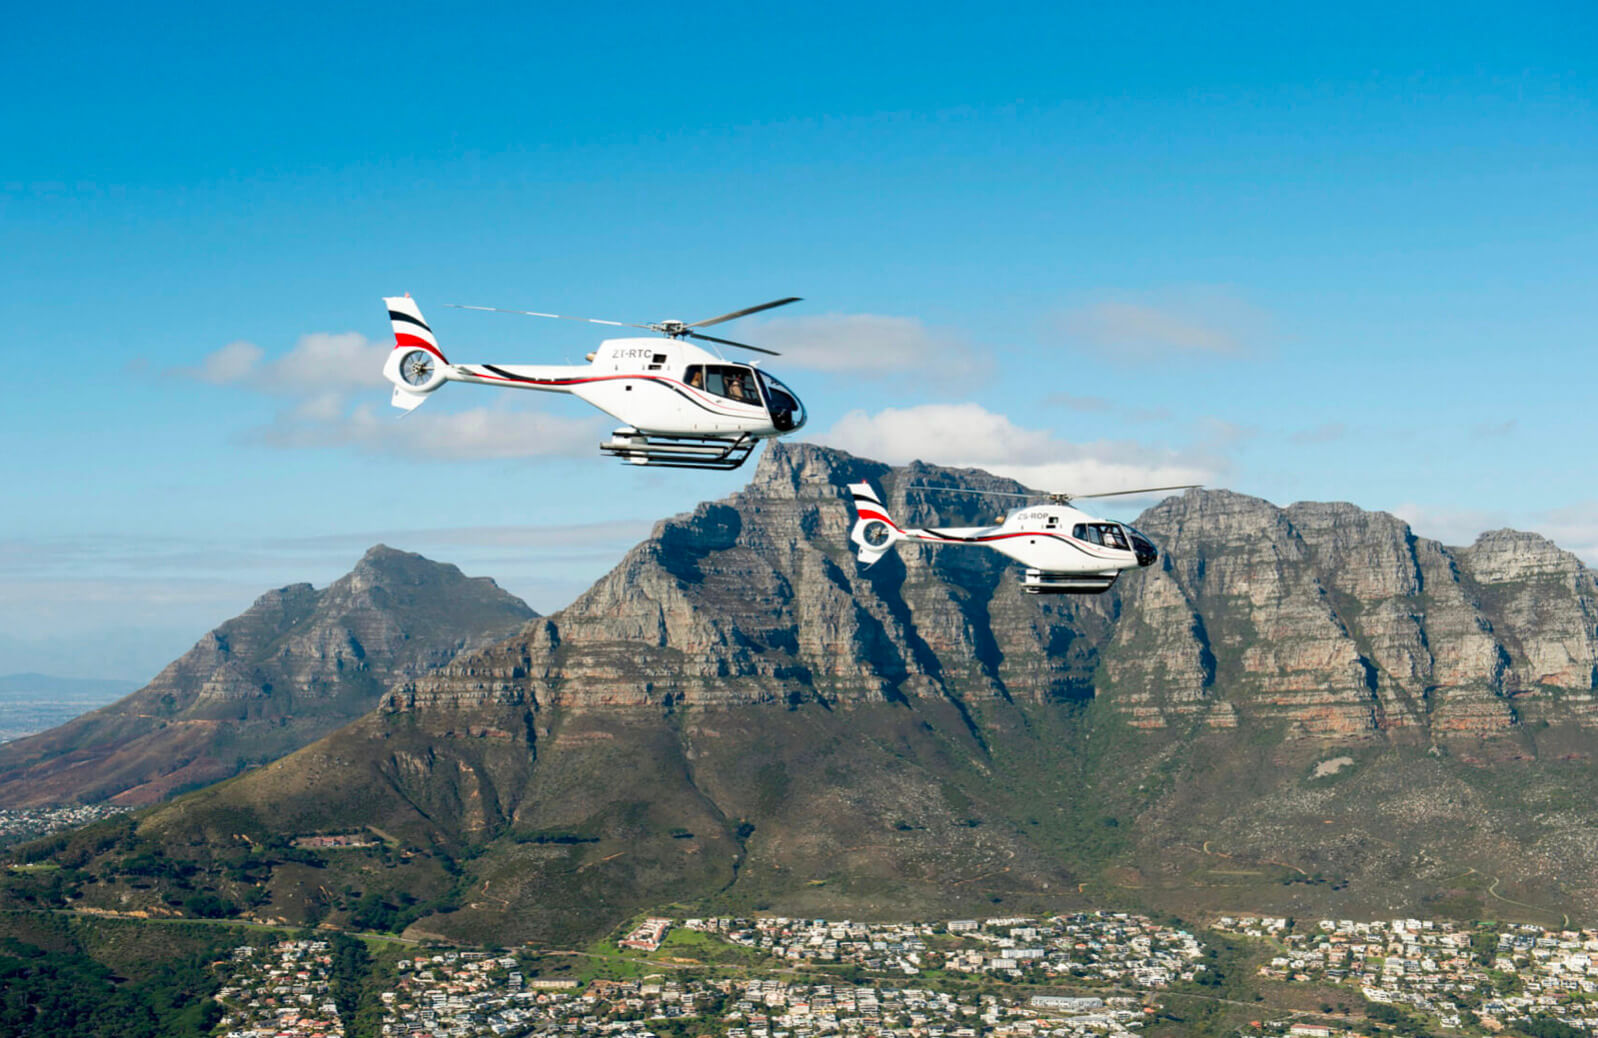 Mauna Delta Helicopters - Sister company to Capetown Helicopters